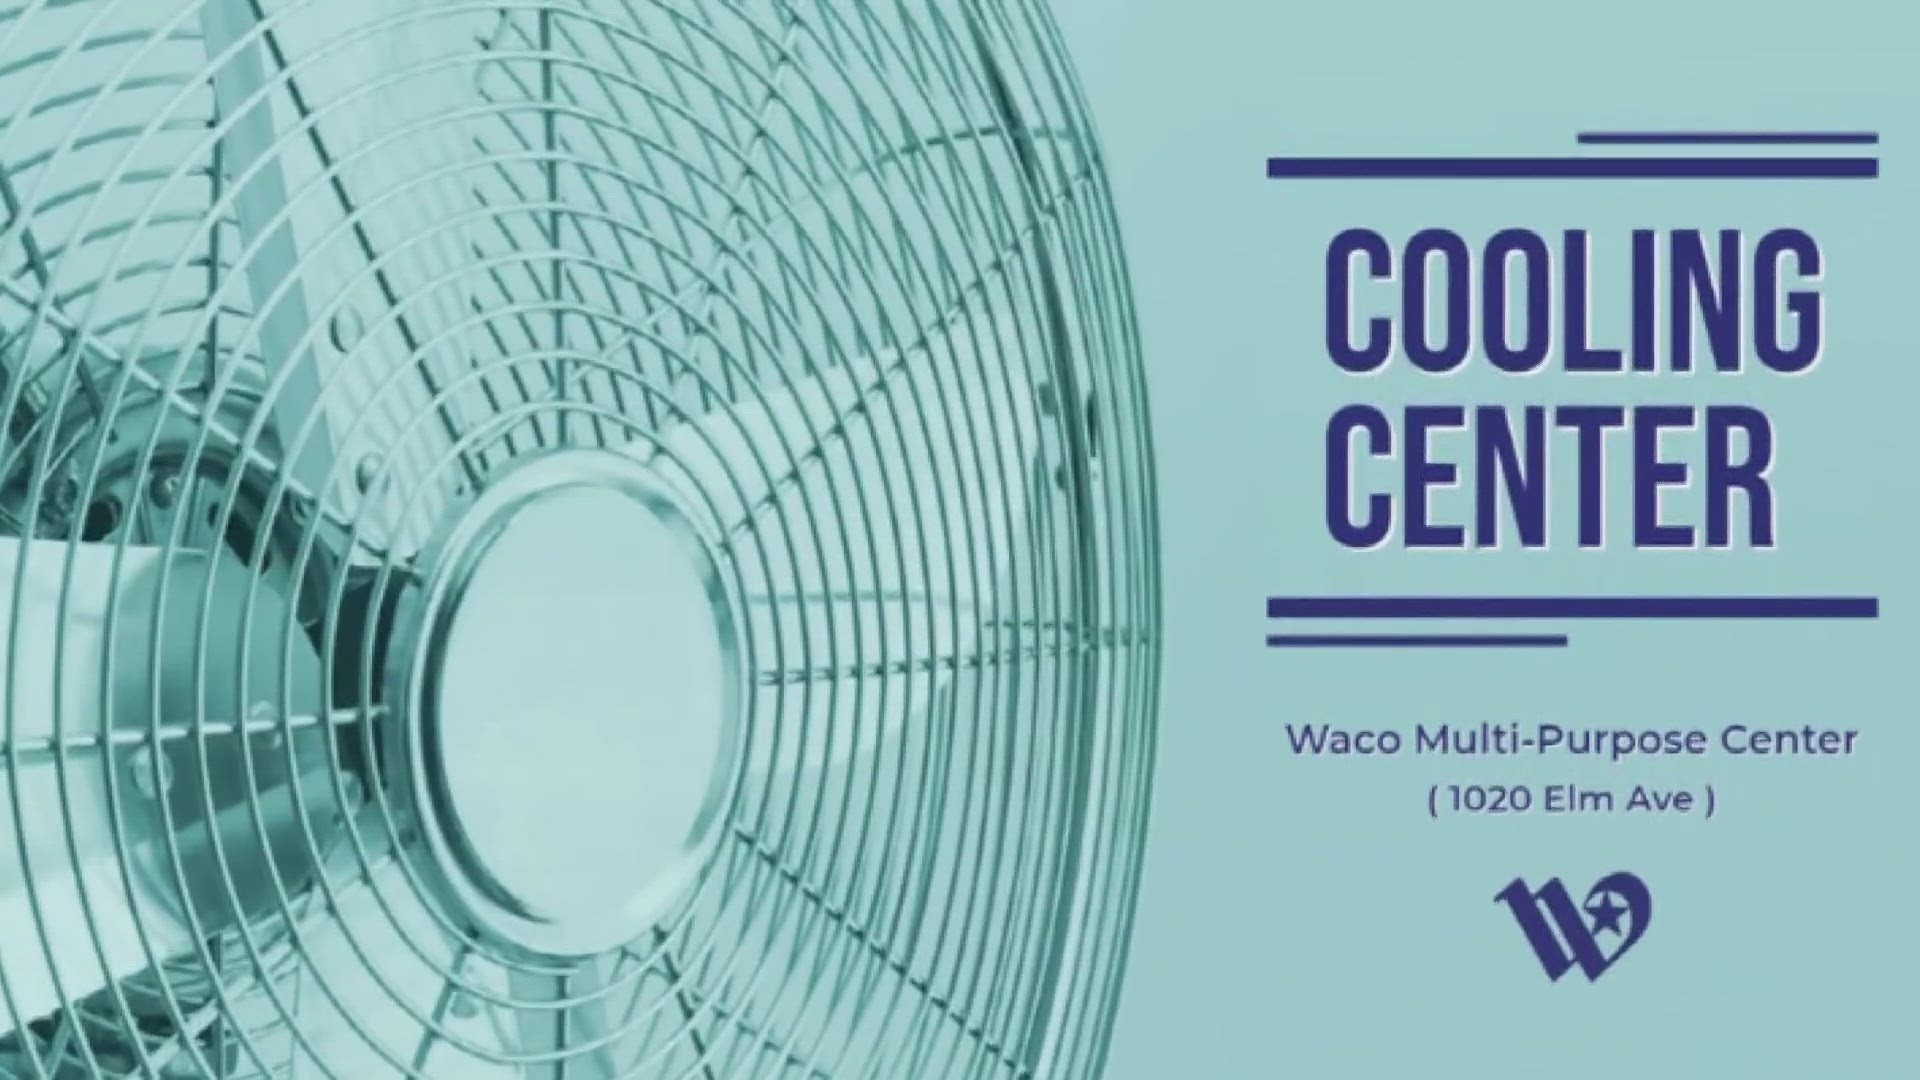 The Waco Multipurpose Center will act as a cooling center throughout the weekend.